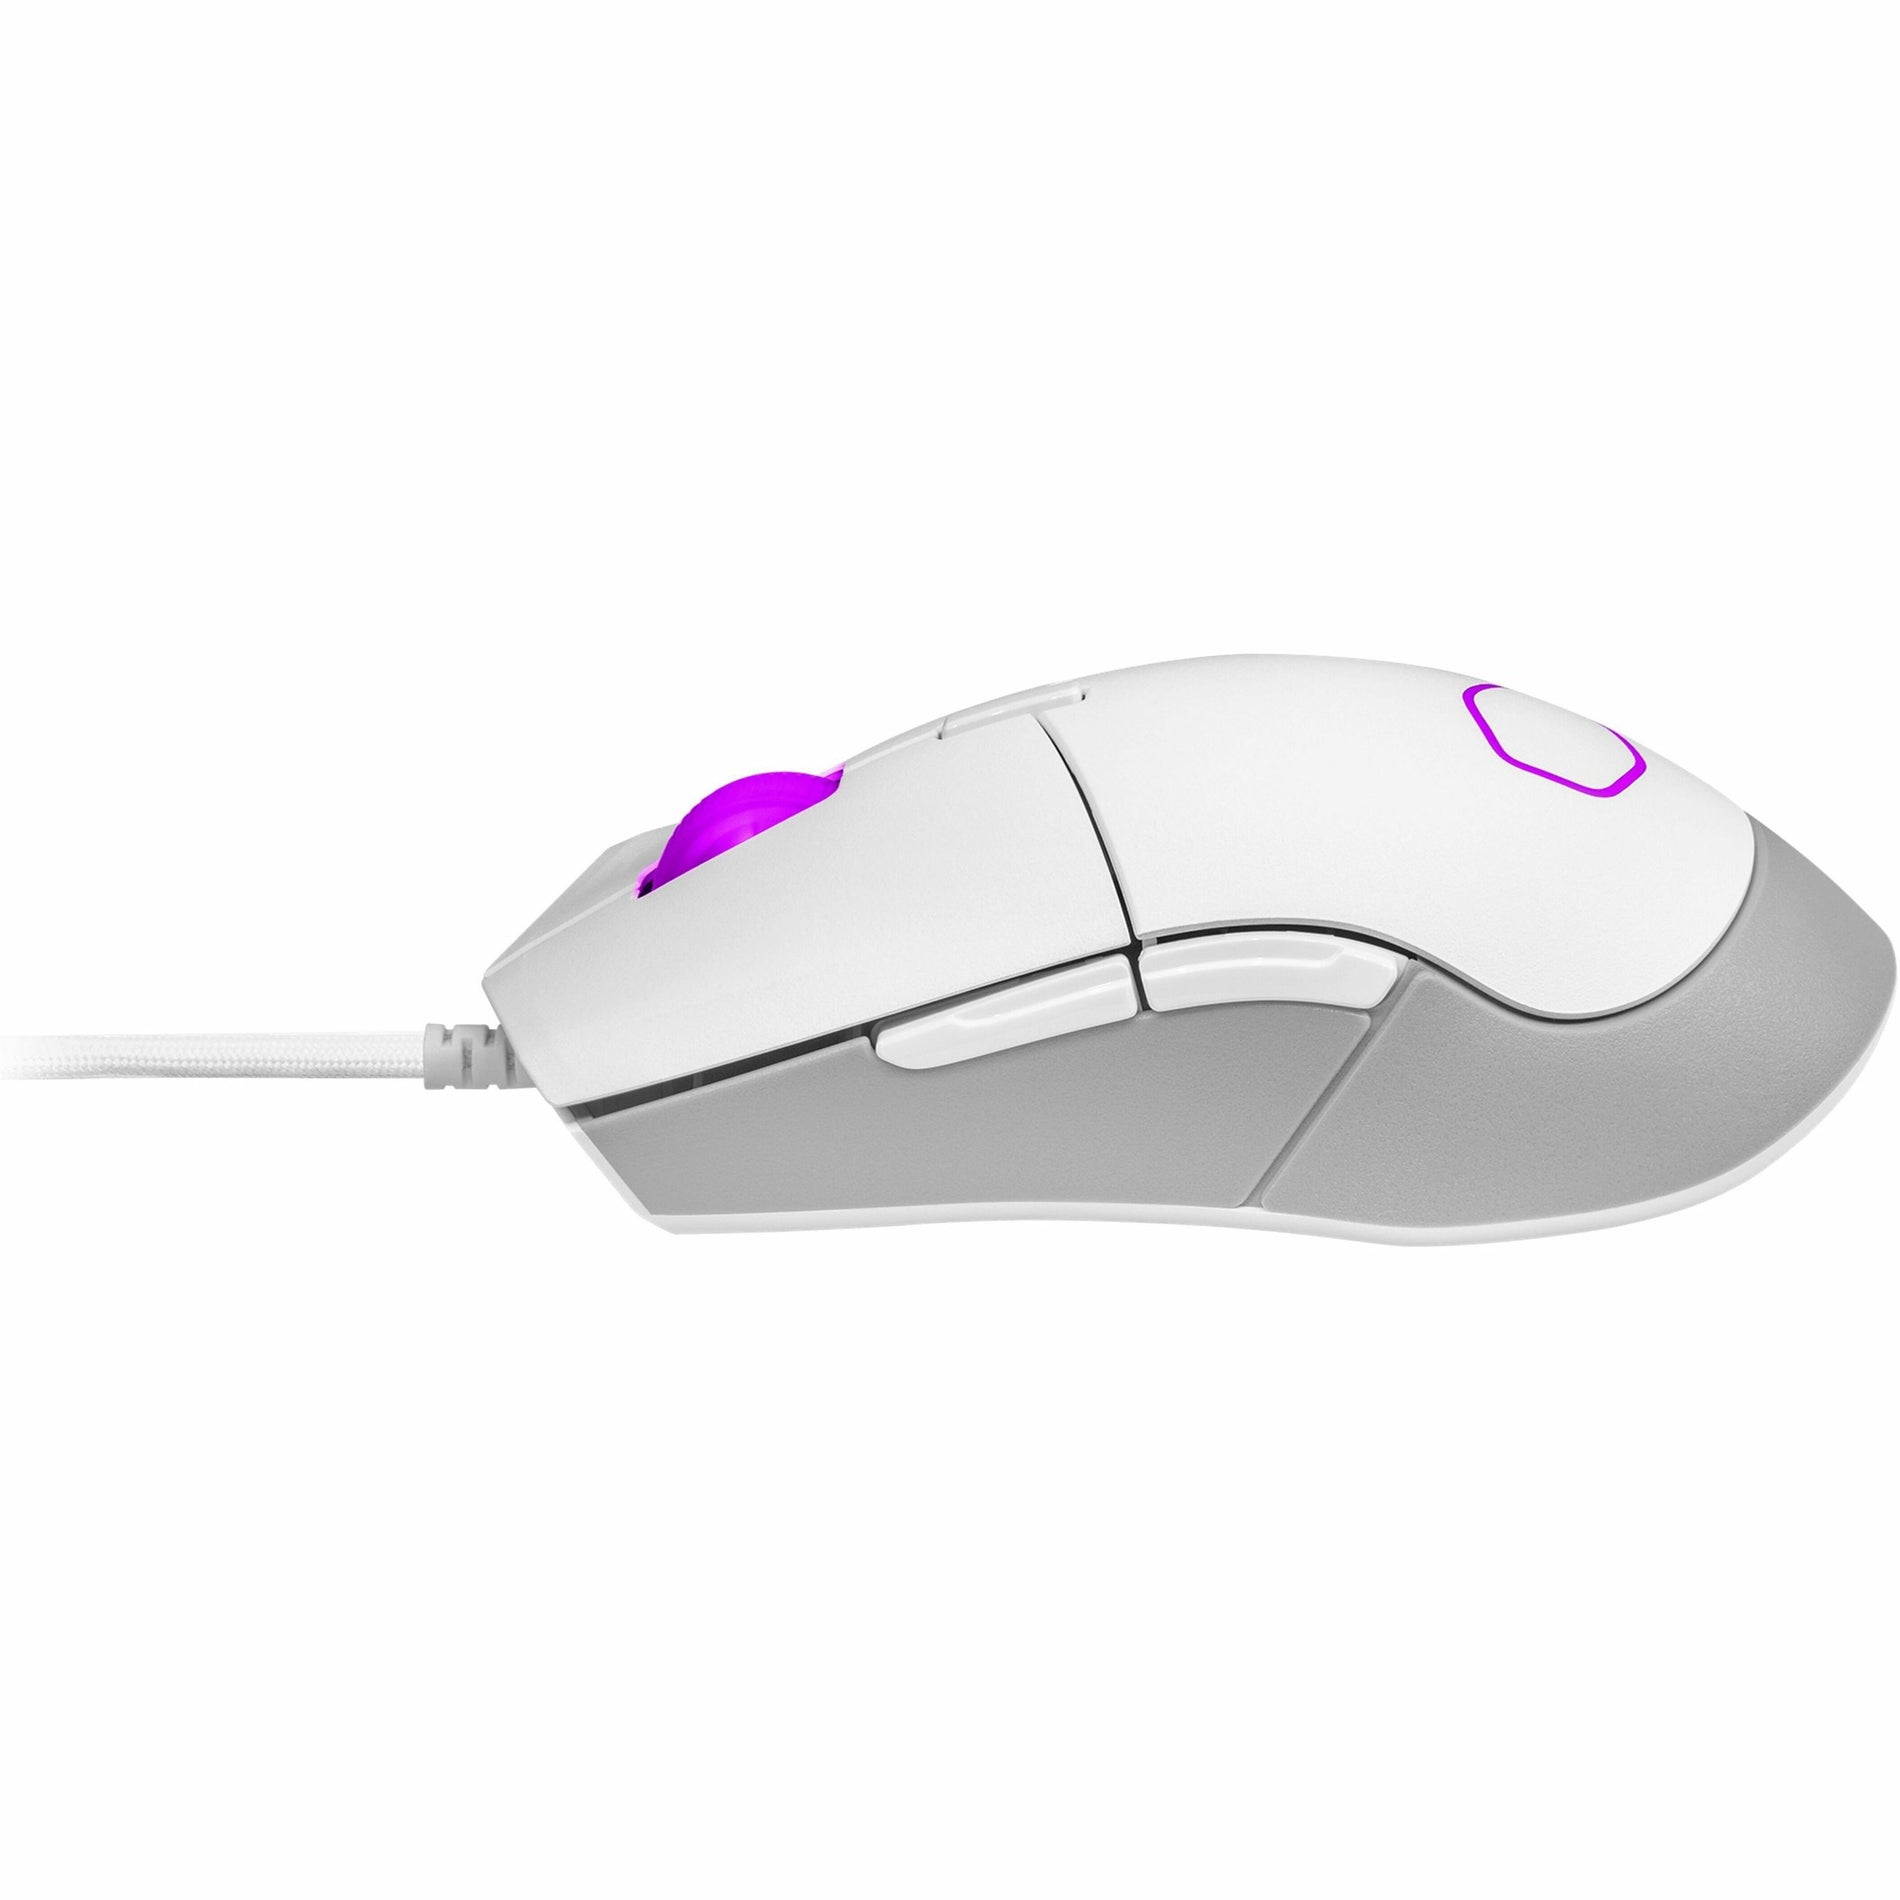 Cooler Master MM-310-WWOL1 MM310 Gaming Mouse, Ergonomic Fit, 12000 dpi, USB Type A